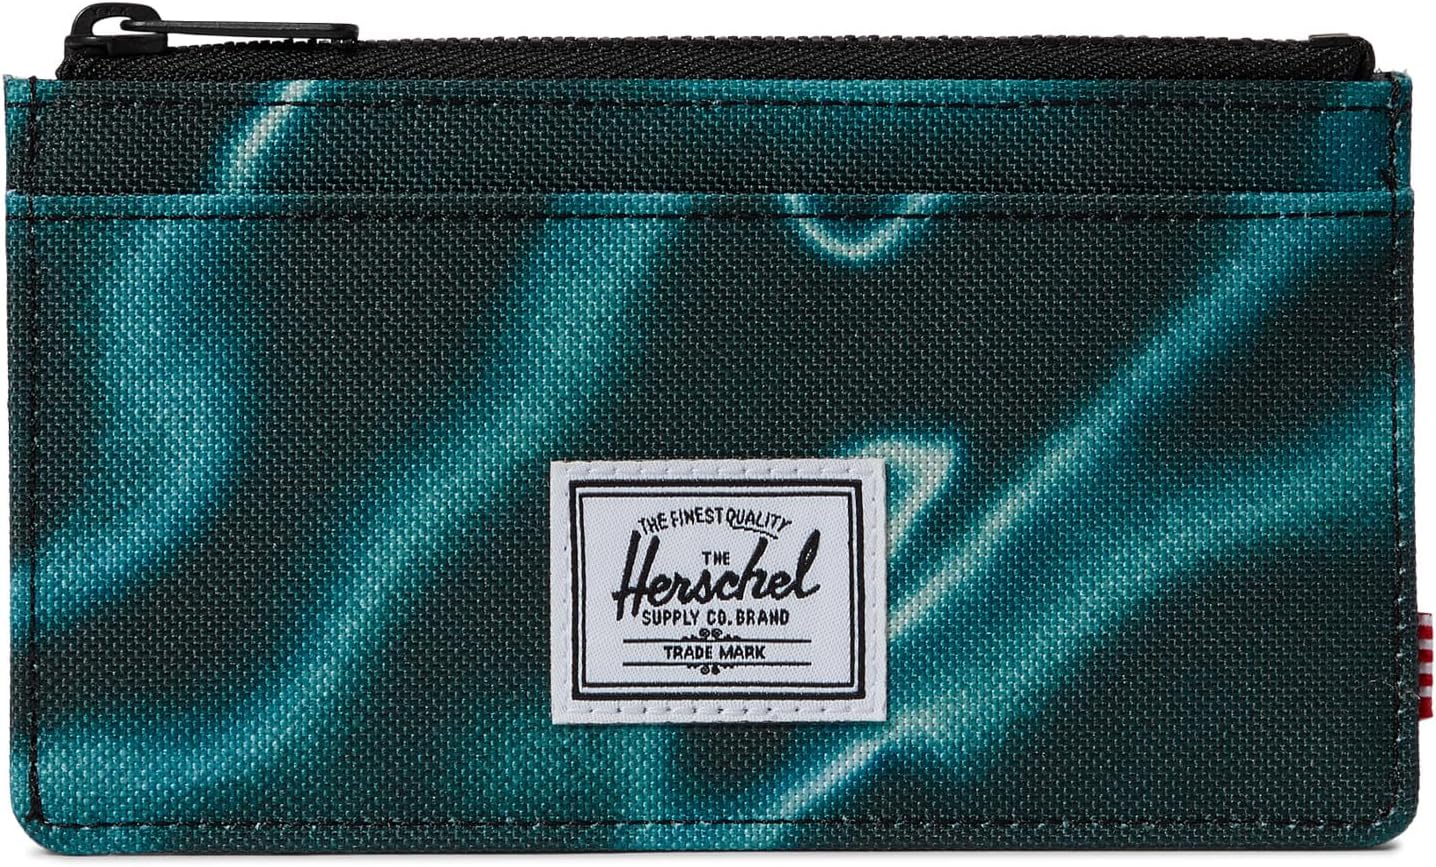 Кошелек Oscar Large Cardholder Herschel Supply Co., цвет Waves Floating Pond floating bed bed fashionable thickening swimming air adult cushion ring inflatable floating floating floating cushion row row fl